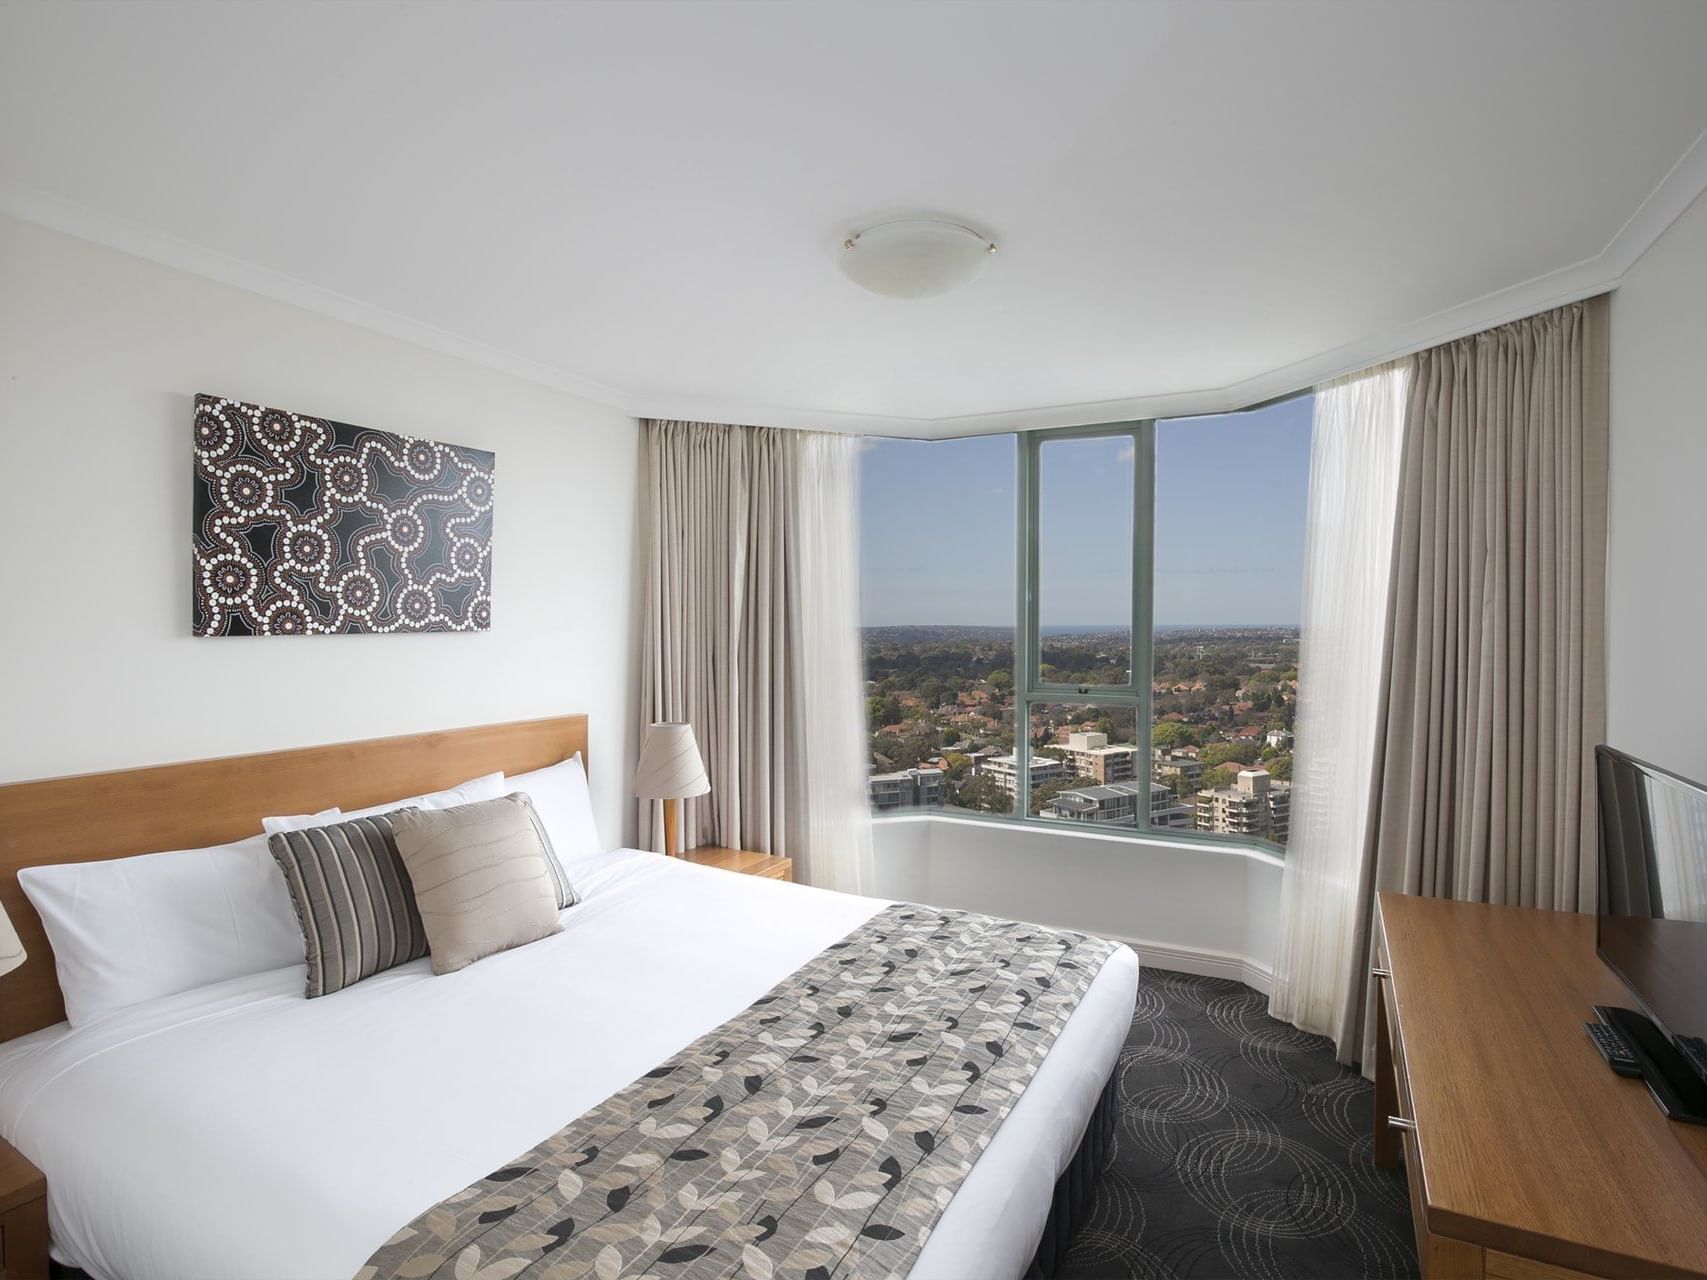 Comfortable room with a out door view at the Sebel Residence Chatswood